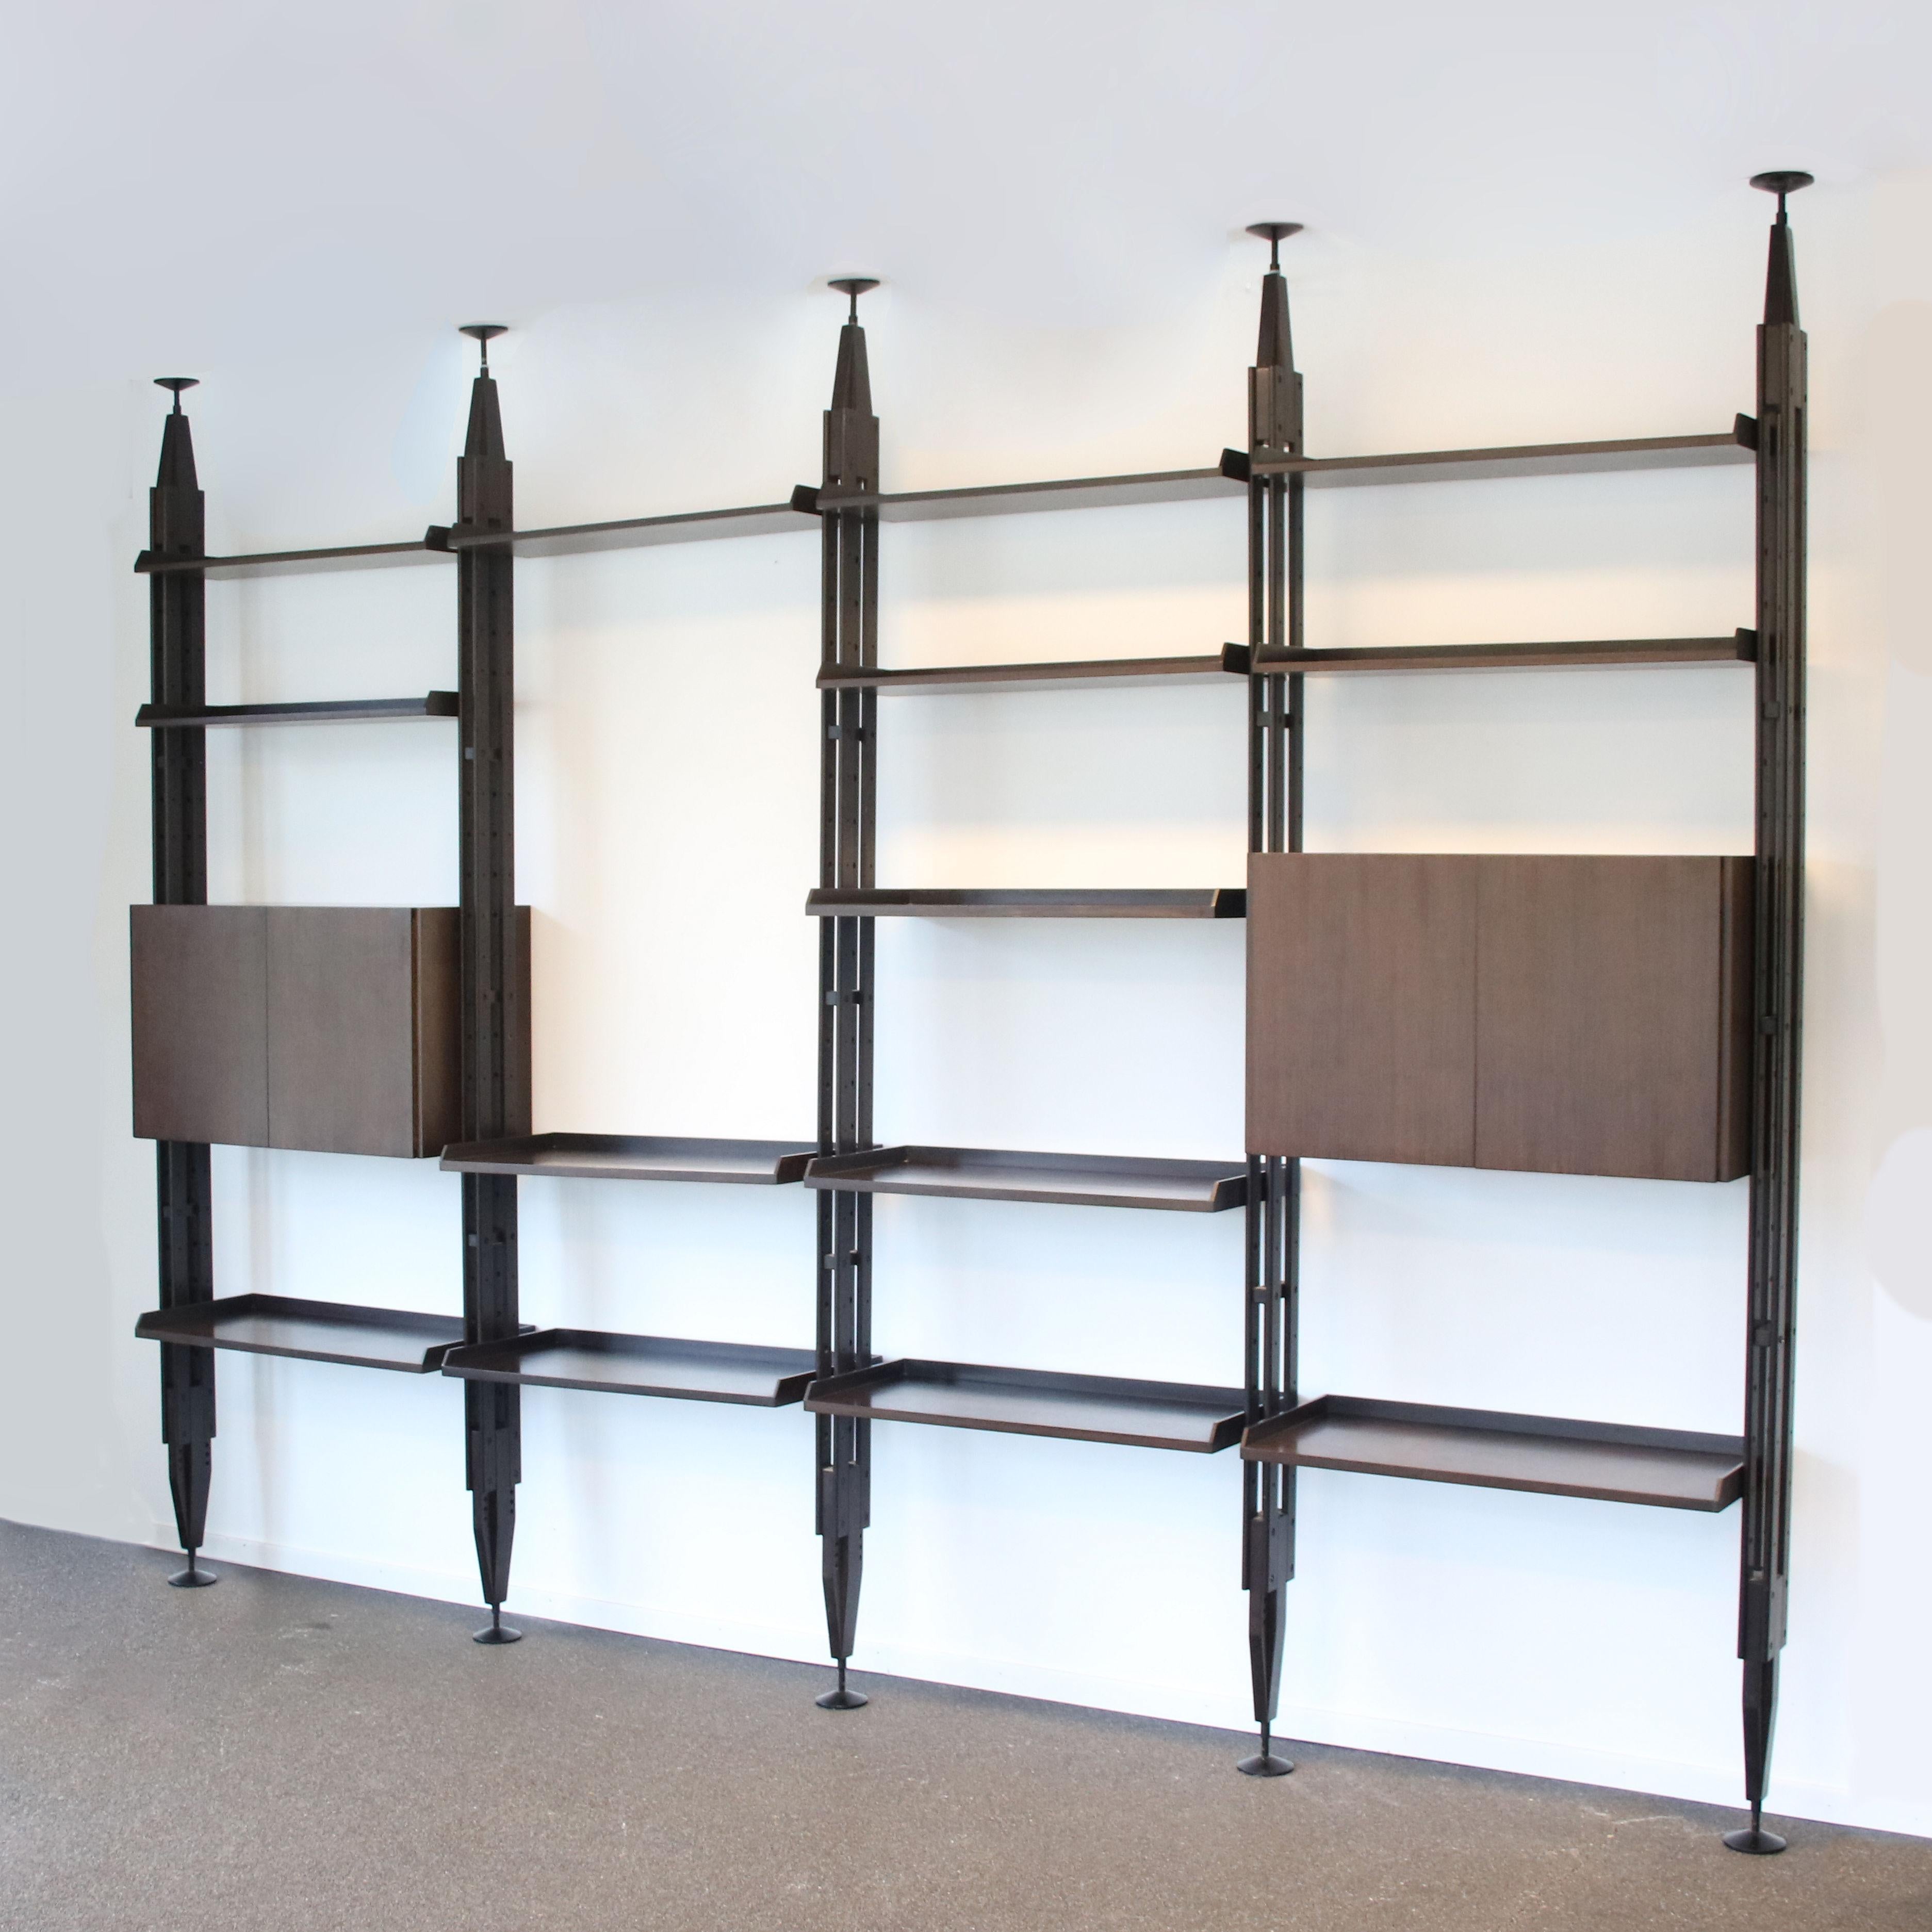 A beautiful, 4-unit wide shelving system desined by Franco Albini, manufactured by Poggi in Italy around 1960.

This large piece is made of high quality dark stained wood with brass details. It excels in elegance and has a beautiful and highly